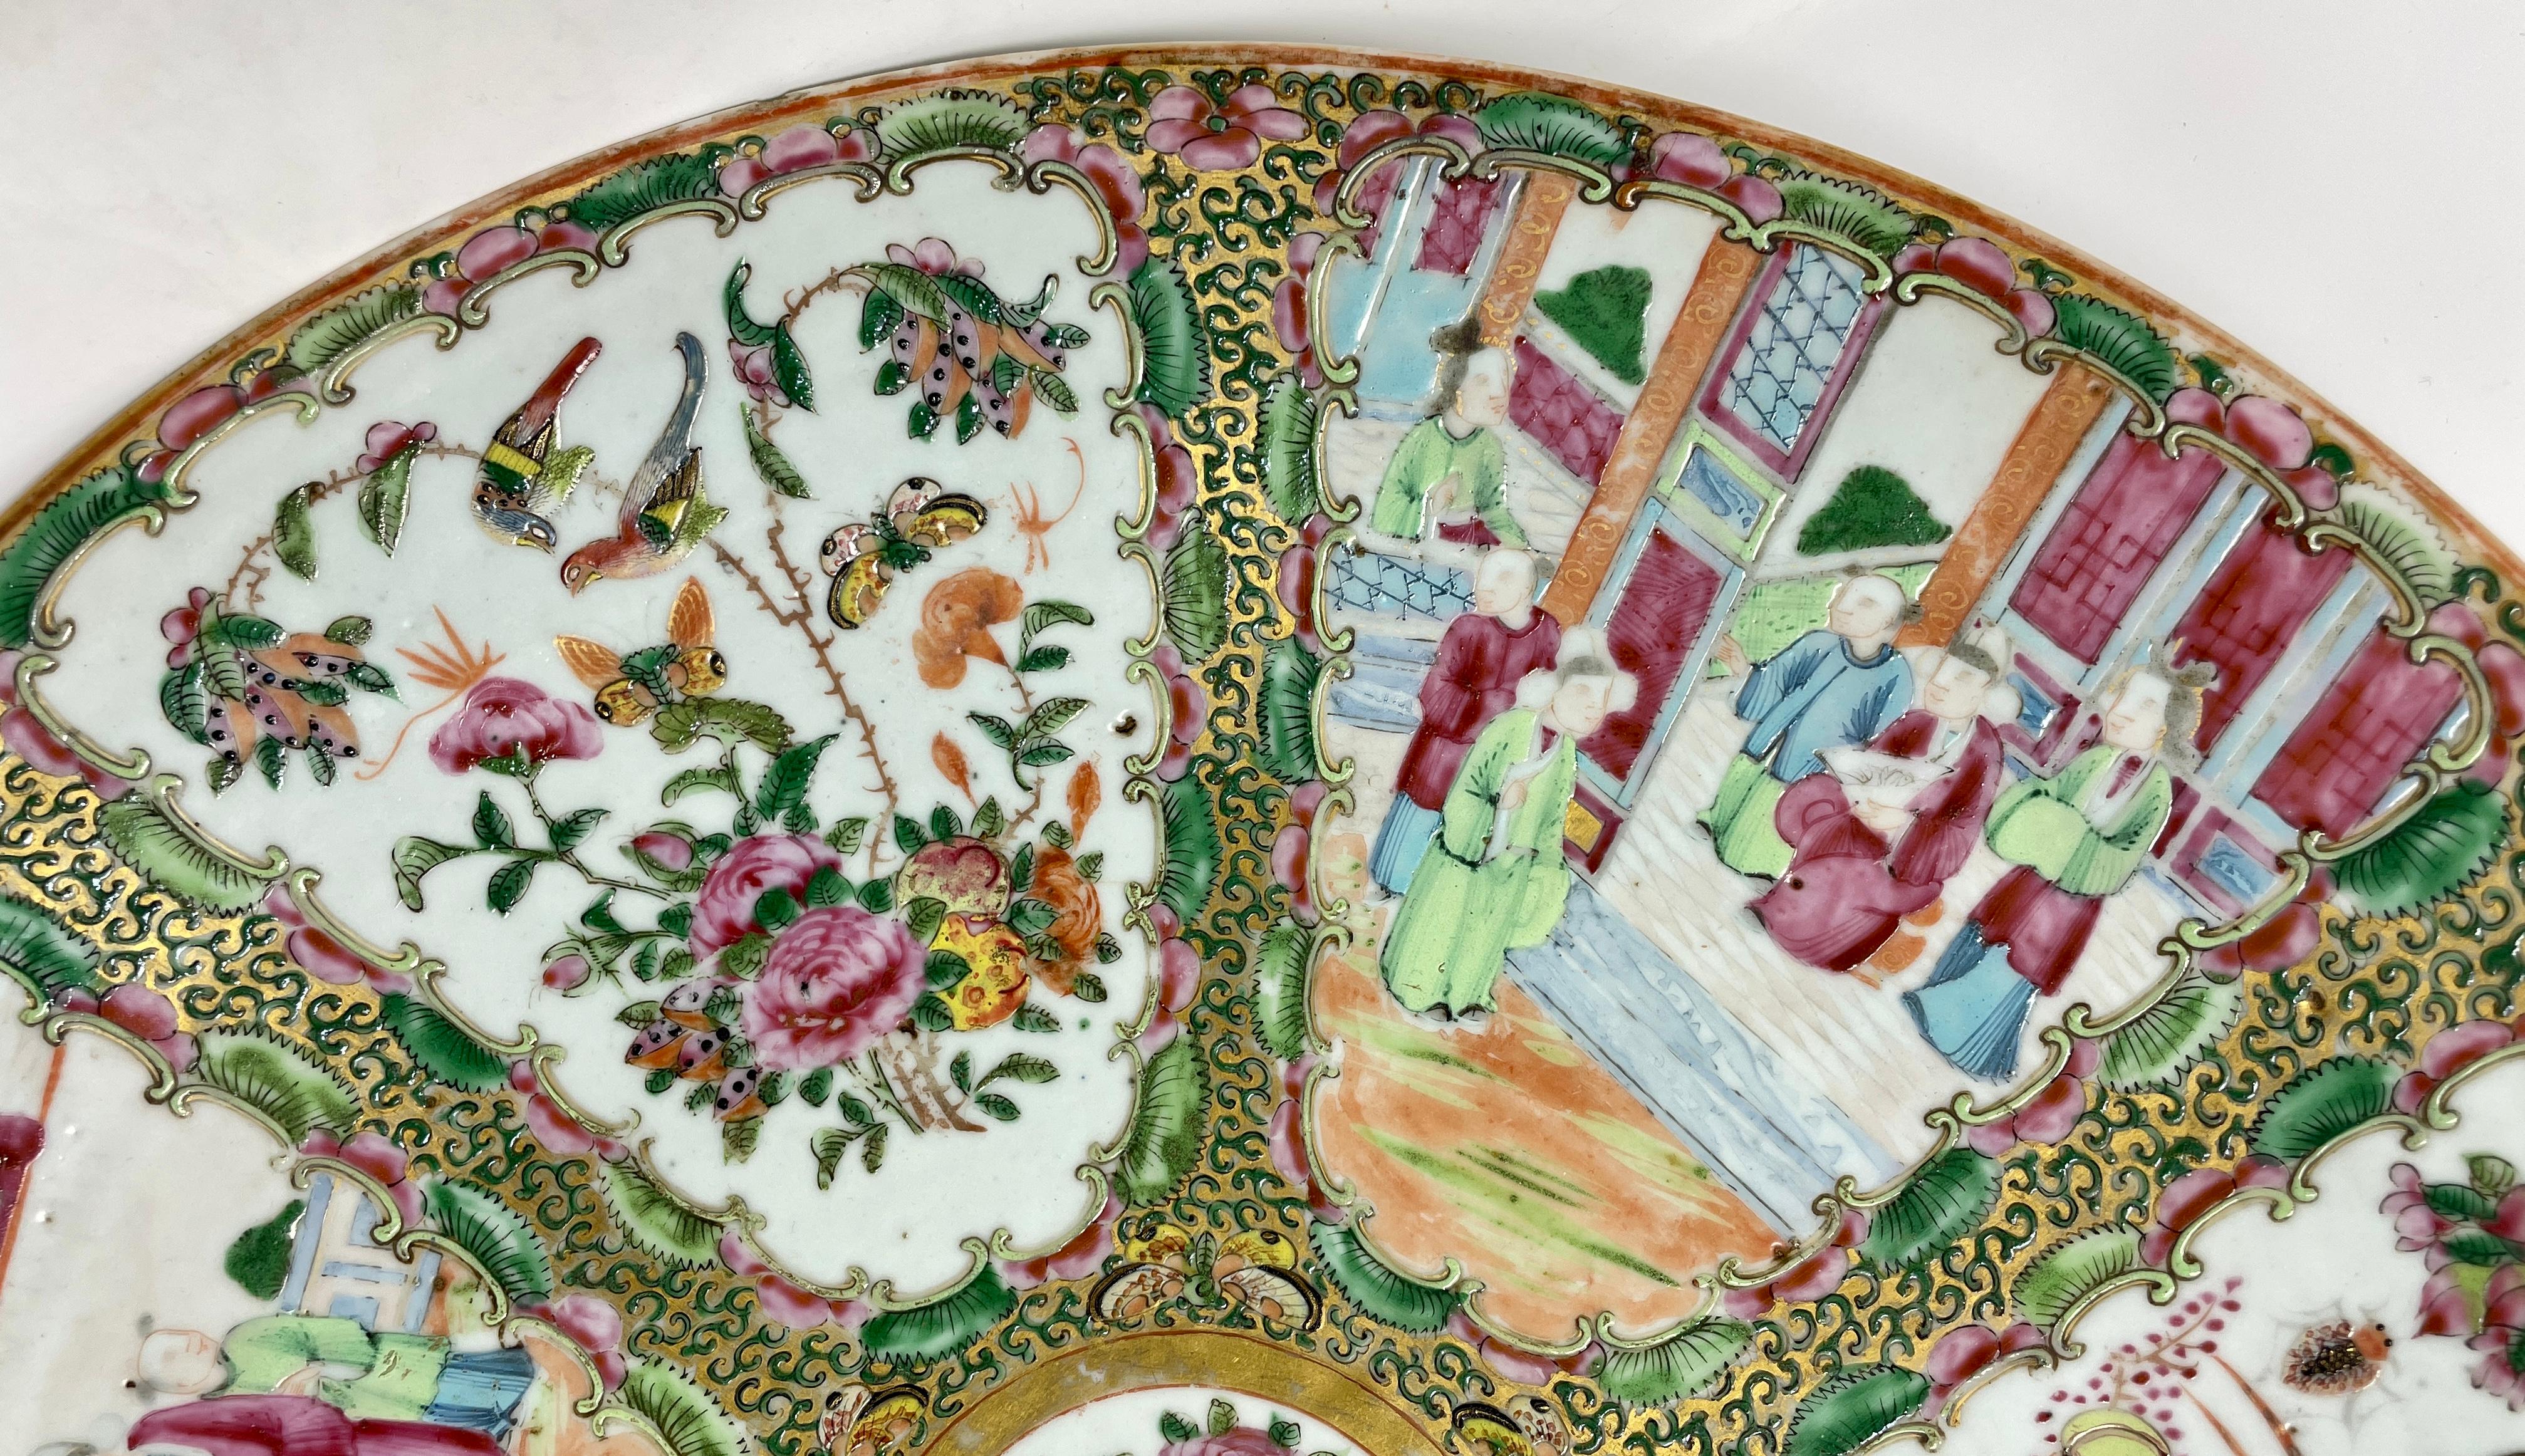 Large Antique Chinese Famille Rose Porcelain Charger Plate, Circa 1880-1890 In Good Condition For Sale In New Orleans, LA